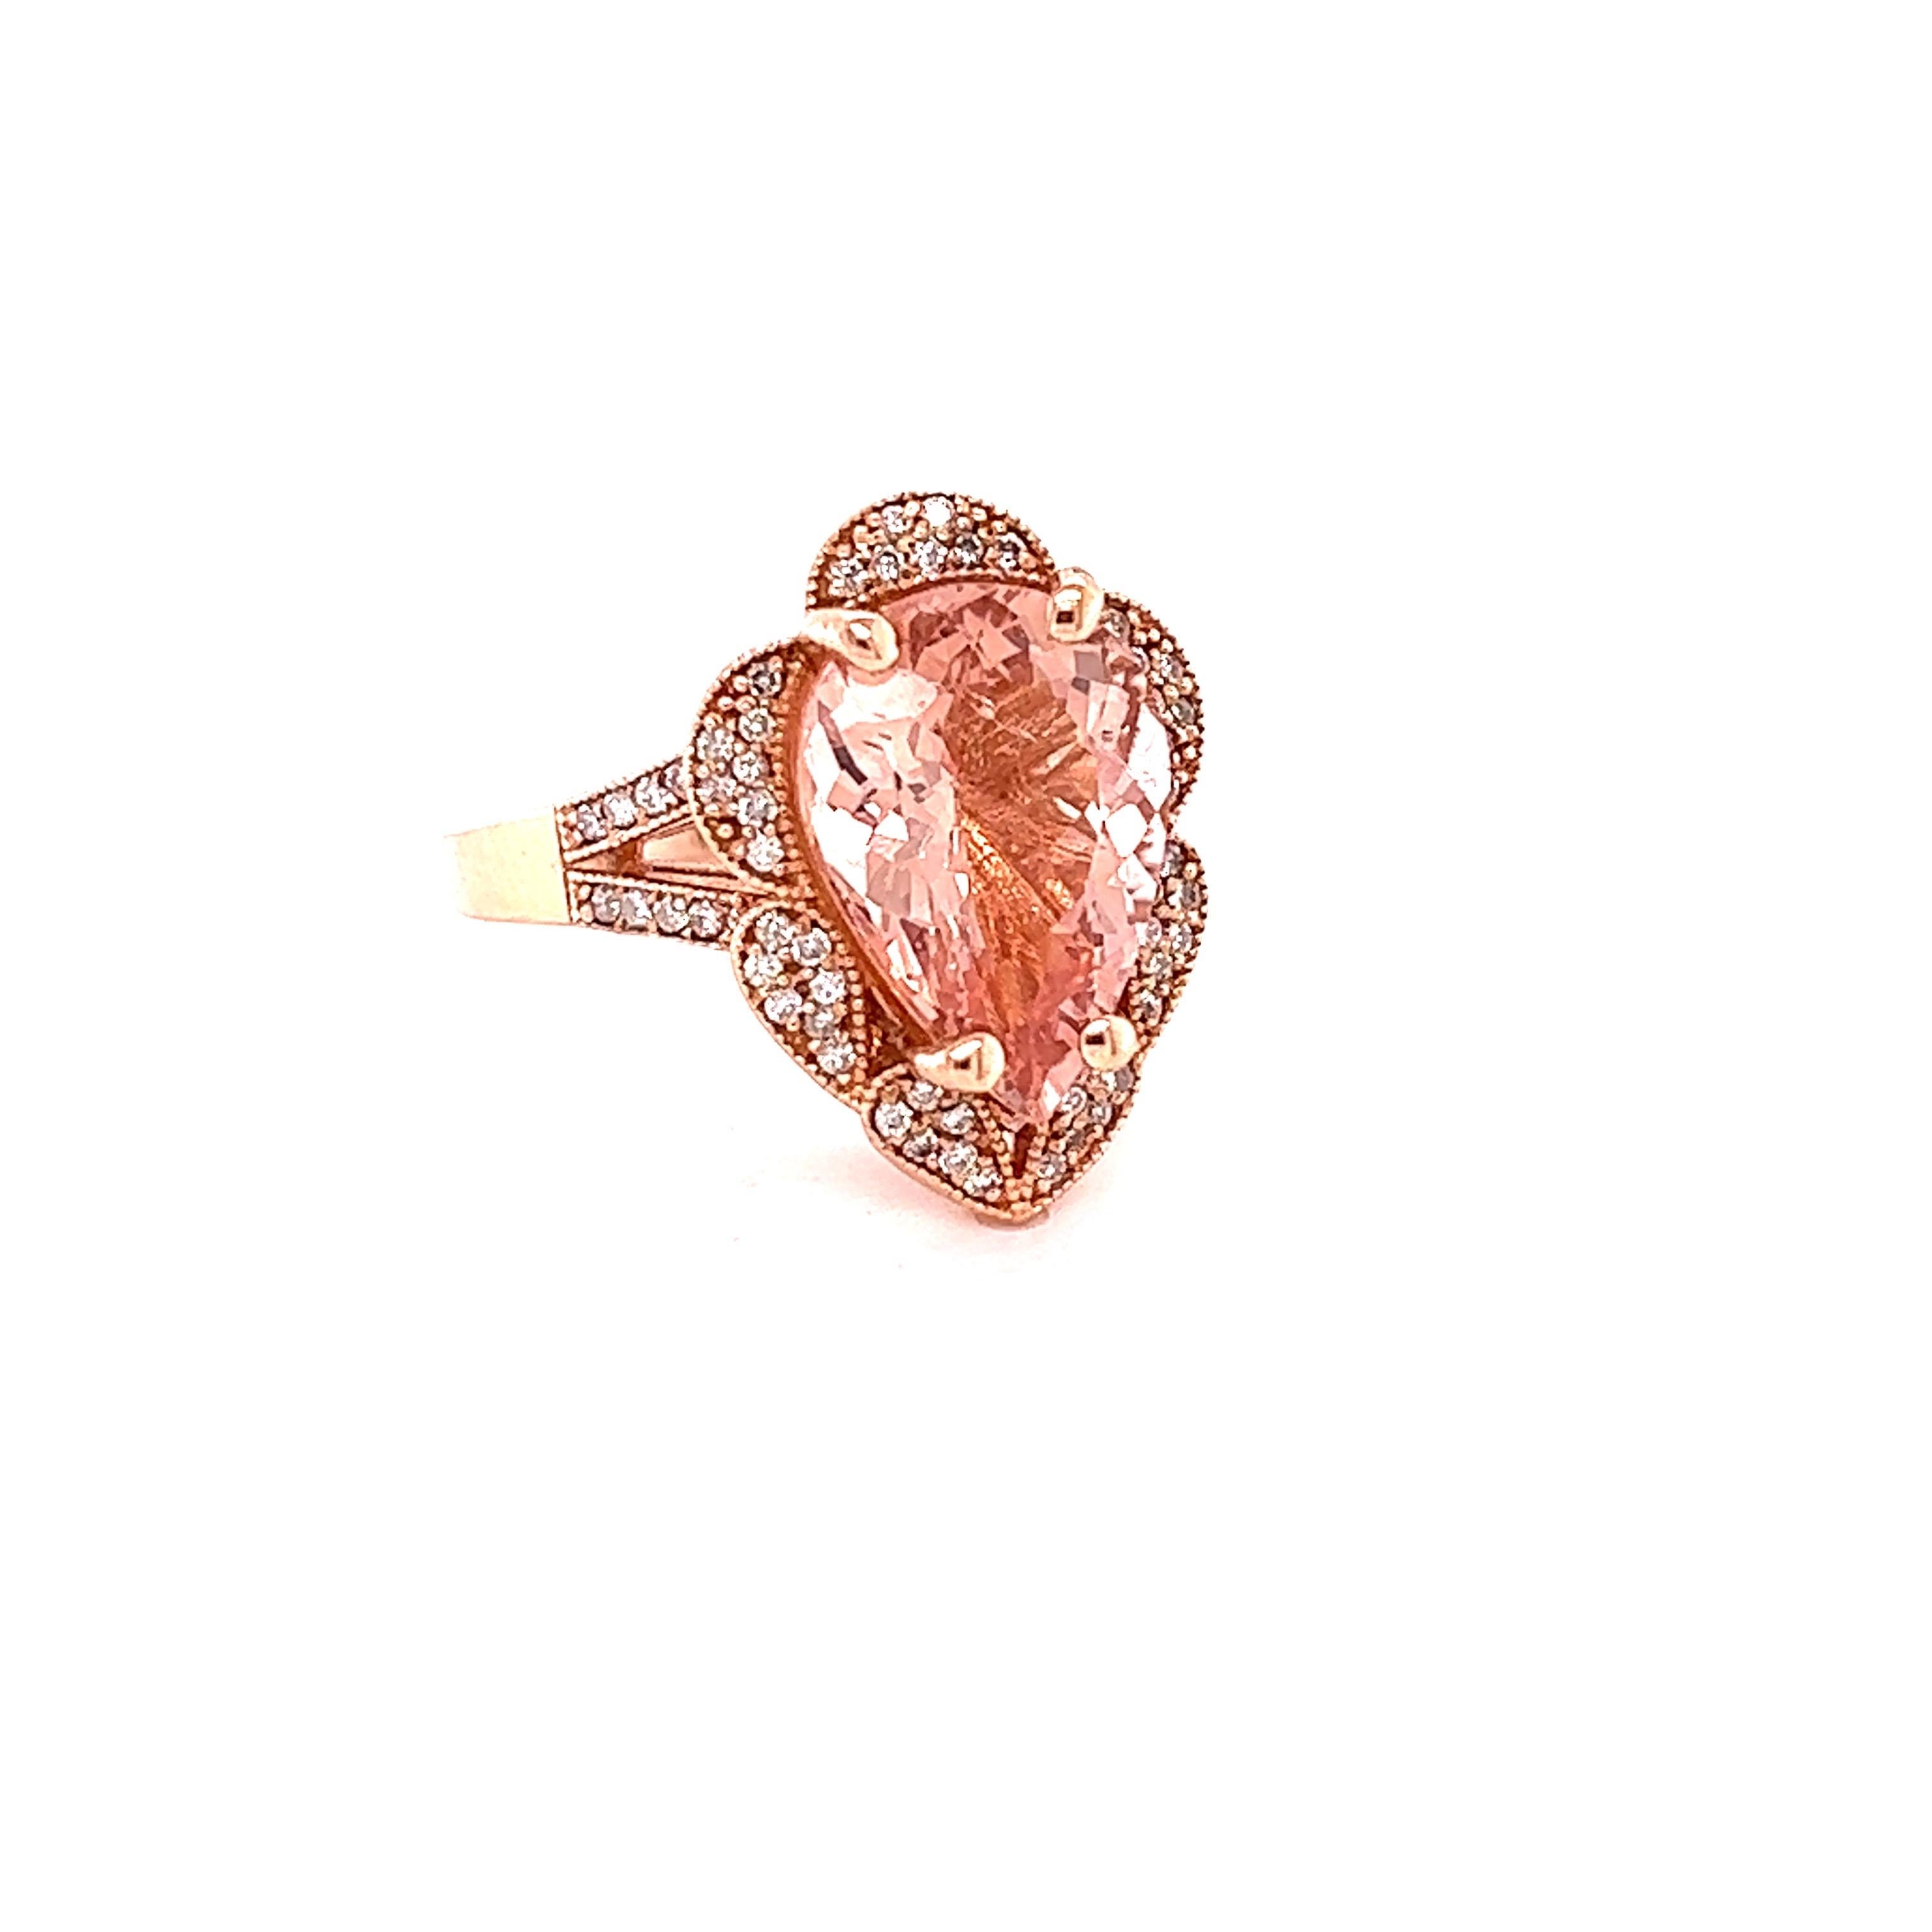 
This Morganite Diamond Ring has a 4.59 Carat Pear Cut Peach Morganite and is surrounded by 67 Round Cut Diamonds that weigh 0.42 carats. (Clarity: VS, Color: H) The Total Carat Weight of the ring is 5.01 Carats.  

The morganite measures at